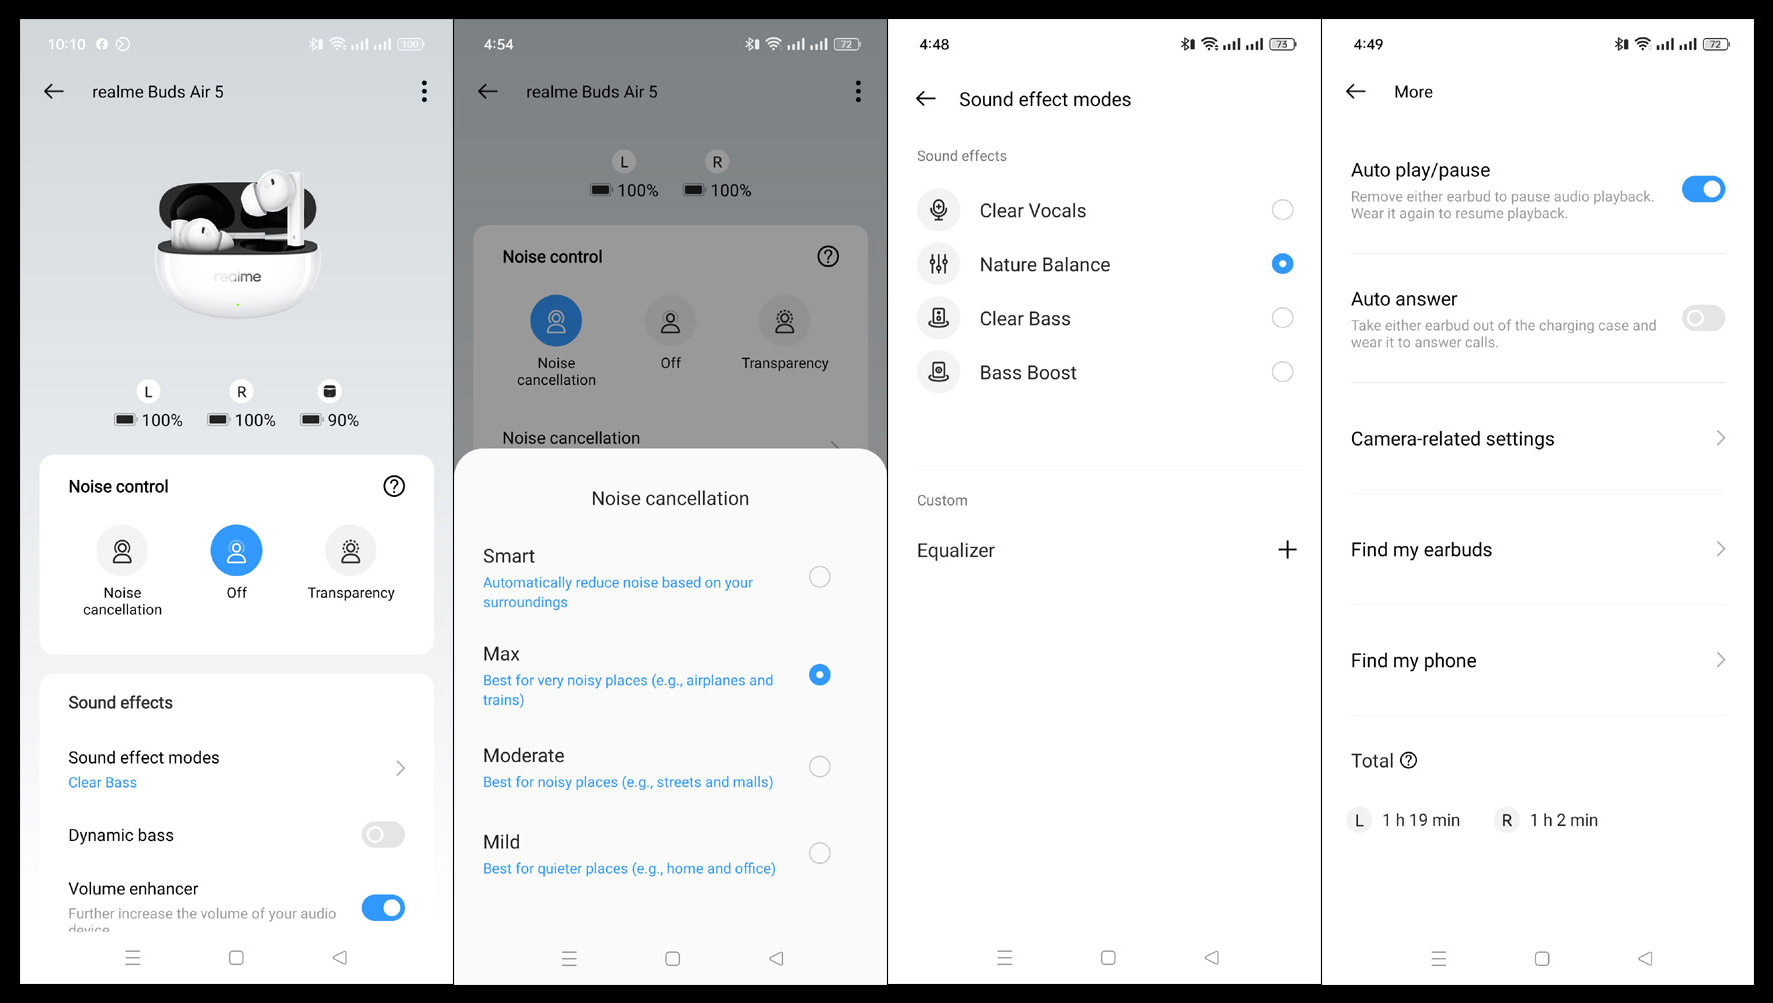 Customizable functions and features via realme Link App